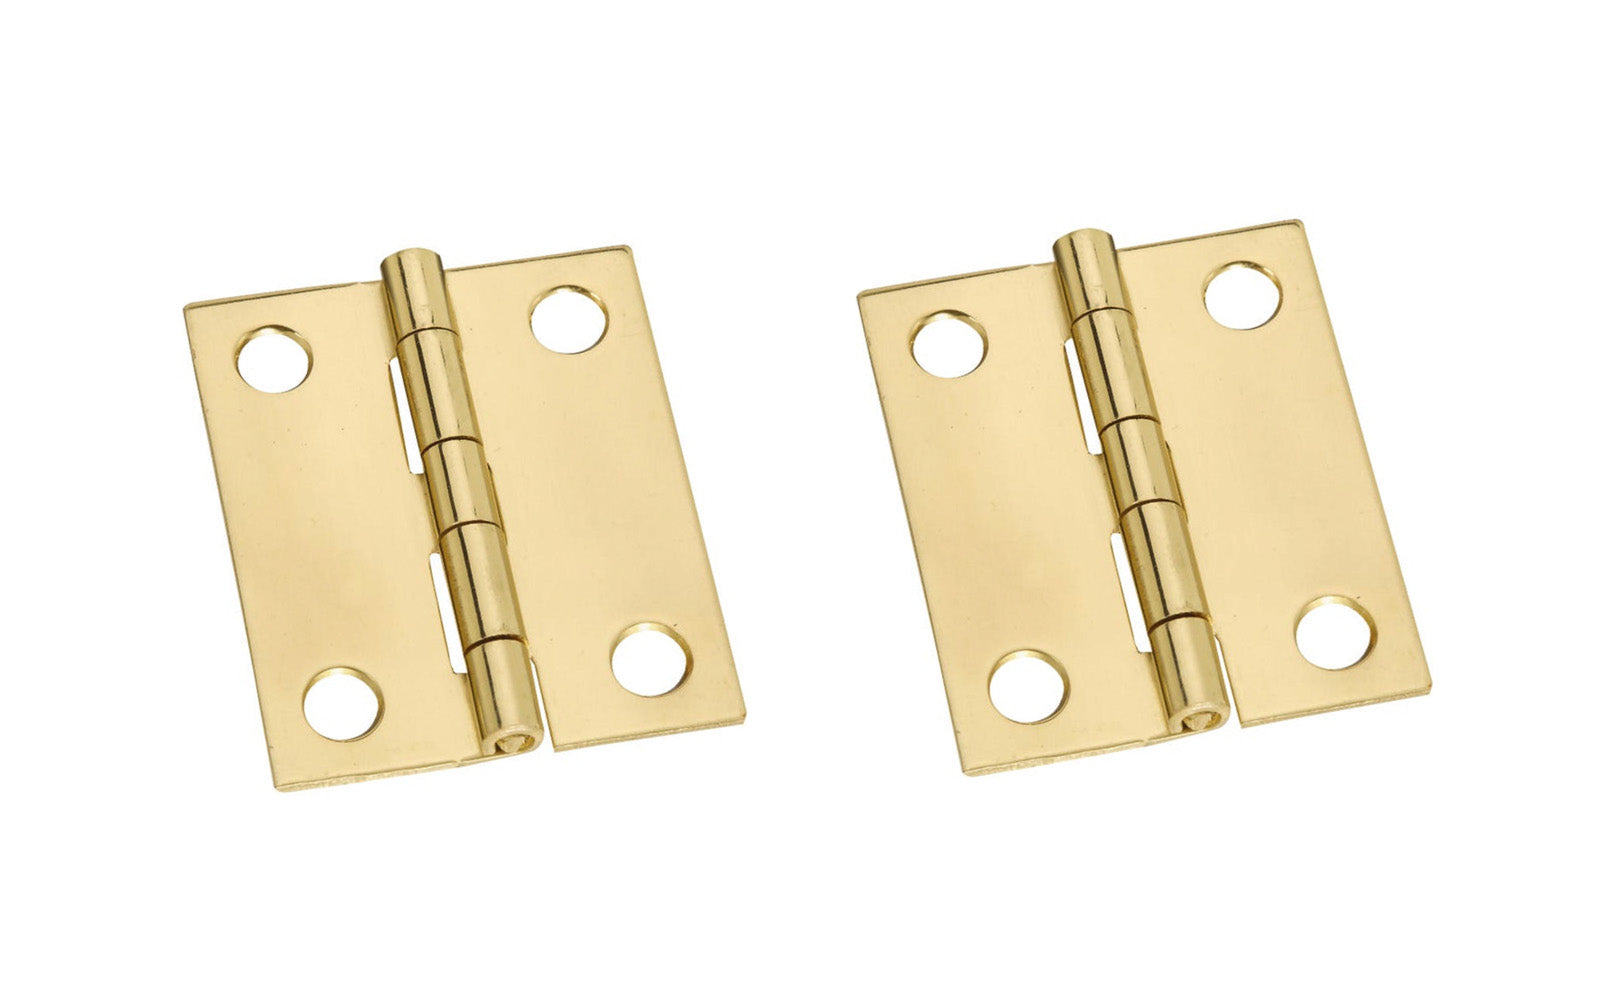 These solid brass hinges add a decorative appearance to small boxes, jewelry boxes, small lightweight cabinet doors, craft projects, etc. Made of solid brass material with a bright brass finish. 1-1/2" high x1-1/4" wide. Surface mount. Non-removable pin. Pair of hinges. National Hardware Model No. N211-359. 